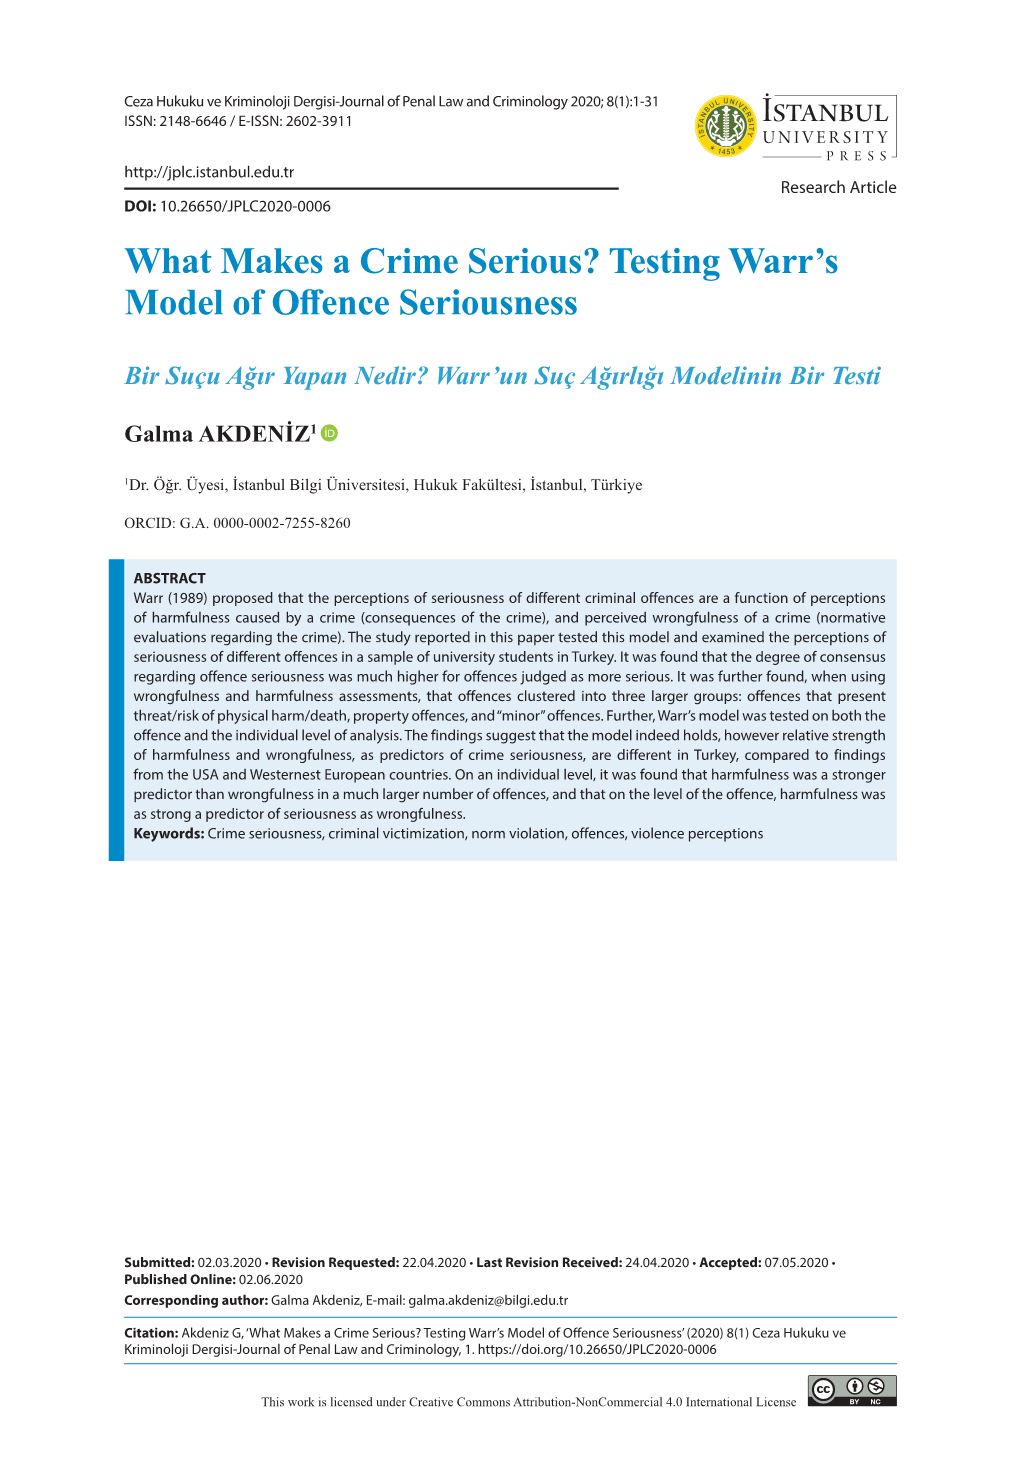 What Makes a Crime Serious? Testing Warr's Model of Offence